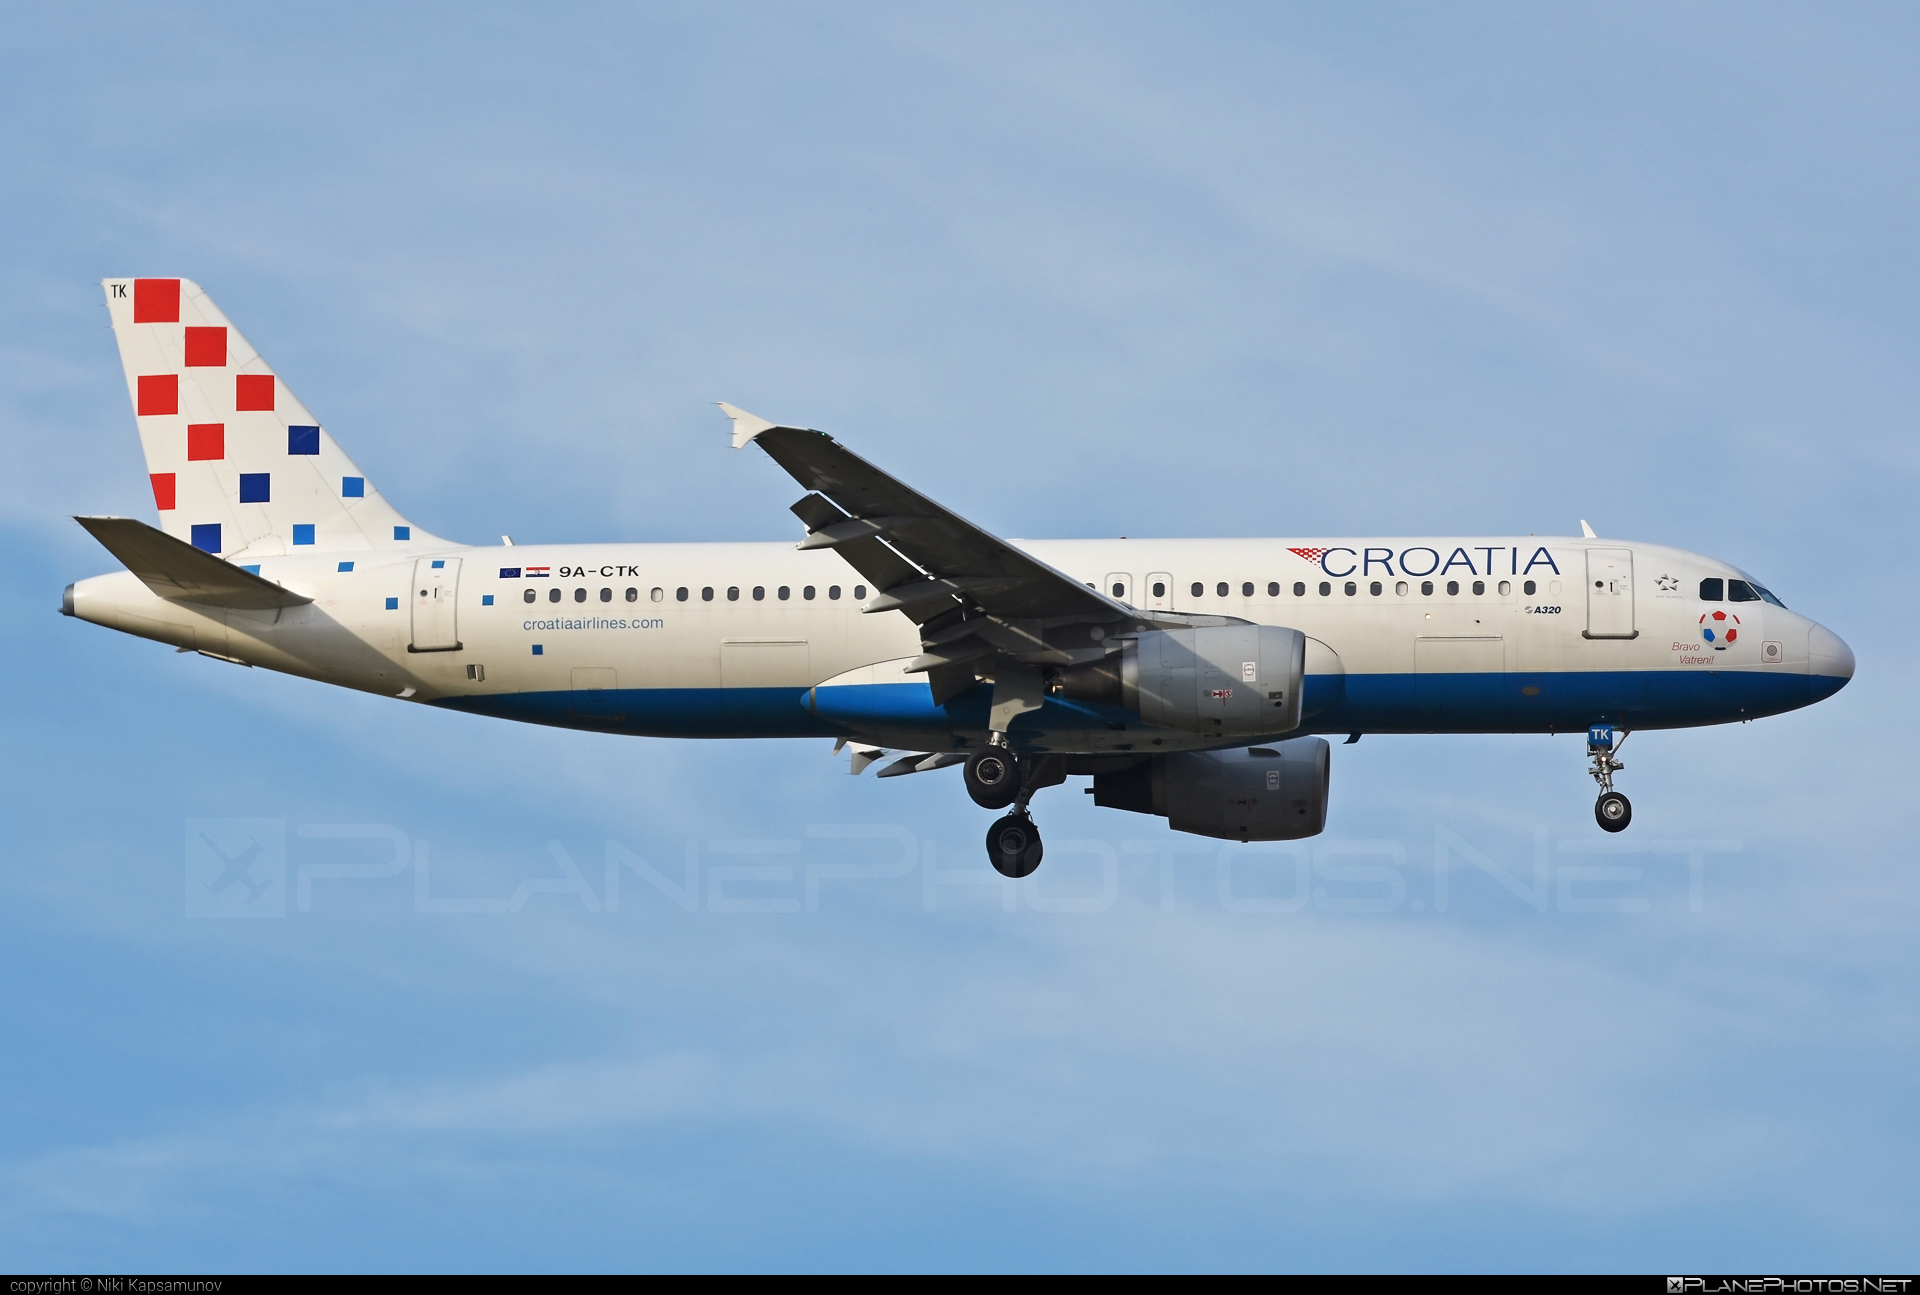 Airbus A320-214 - 9A-CTK operated by Croatia Airlines #CroatiaAirlines #a320 #a320family #airbus #airbus320